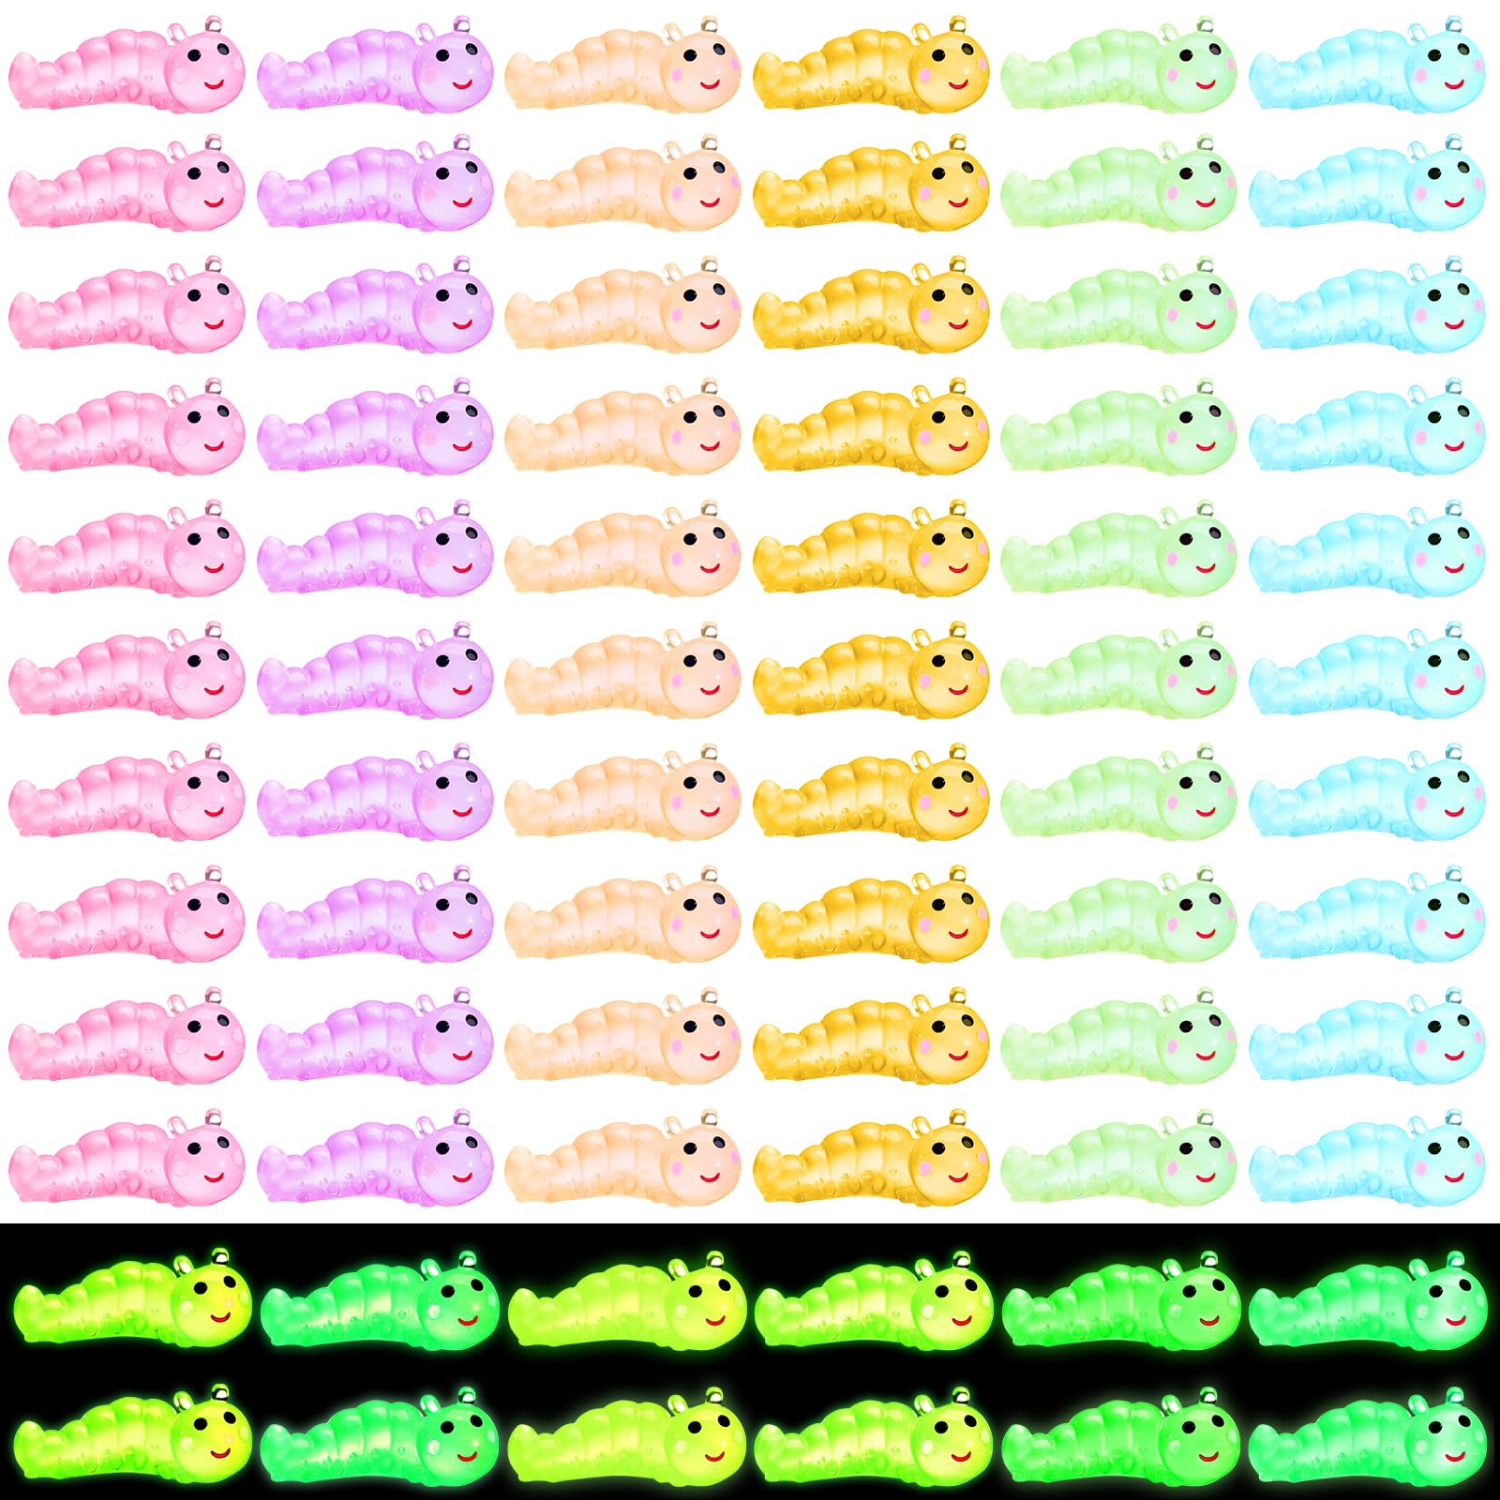 60-Piece Mini Resin Caterpillar Figures for DIY Garden Decor and Party Decorations - Luminous Mini Charms for Micro Landscapes